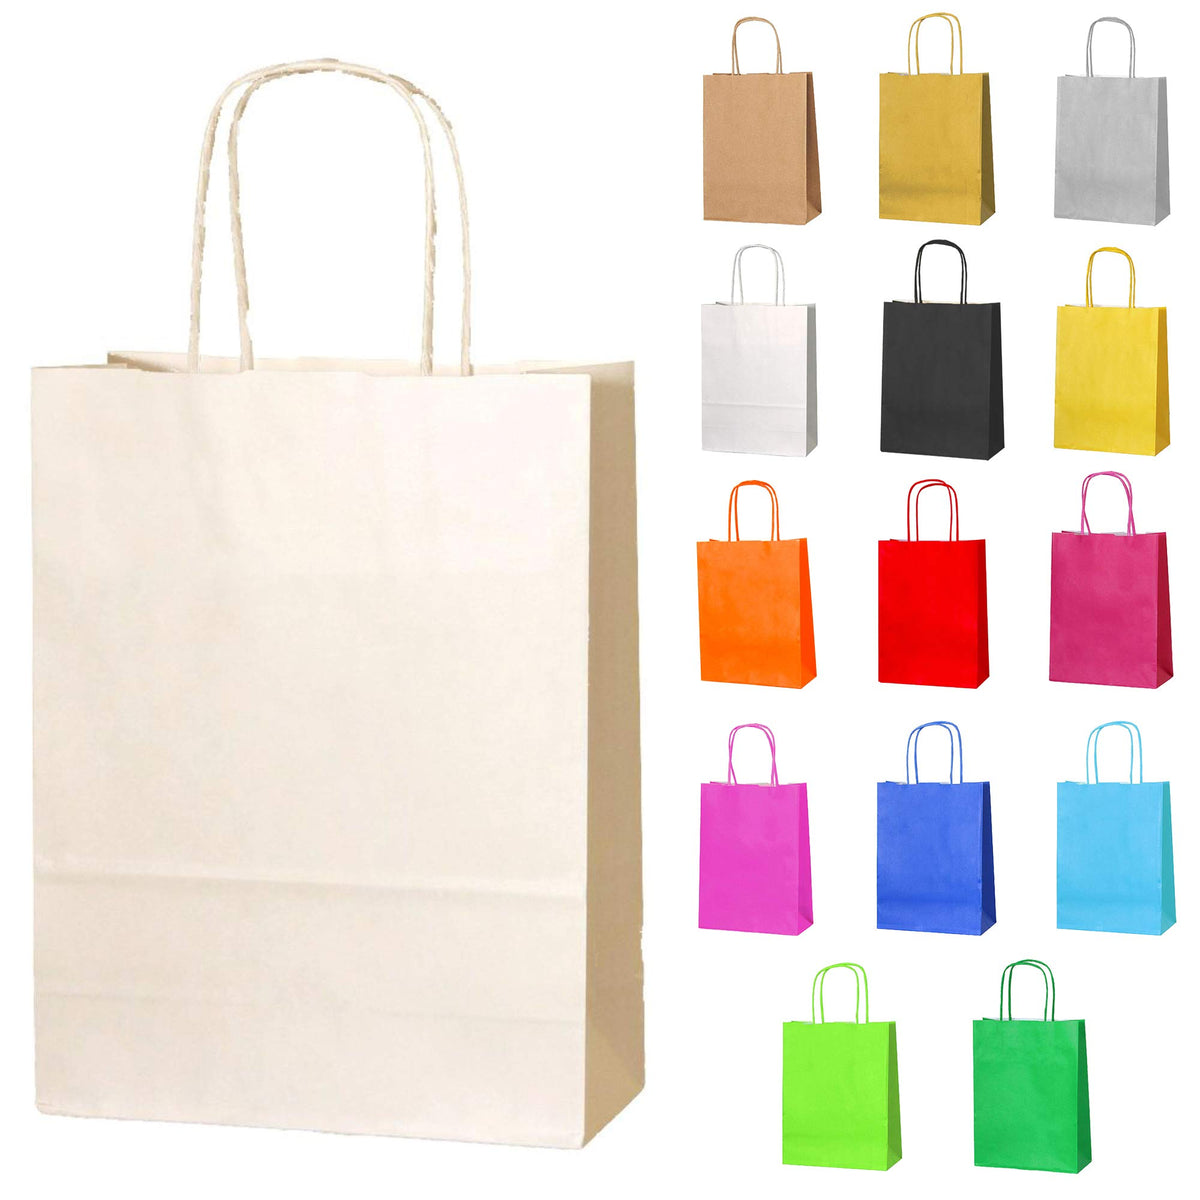 Thepaperbagstore 5 Cream Paper Party Bags With Handles - Colourful Paper Gift Bags for Kids and Adults Parties, Birthdays, Weddings, Baby Showers, Hen Parties and Sweets 18x22x8cm